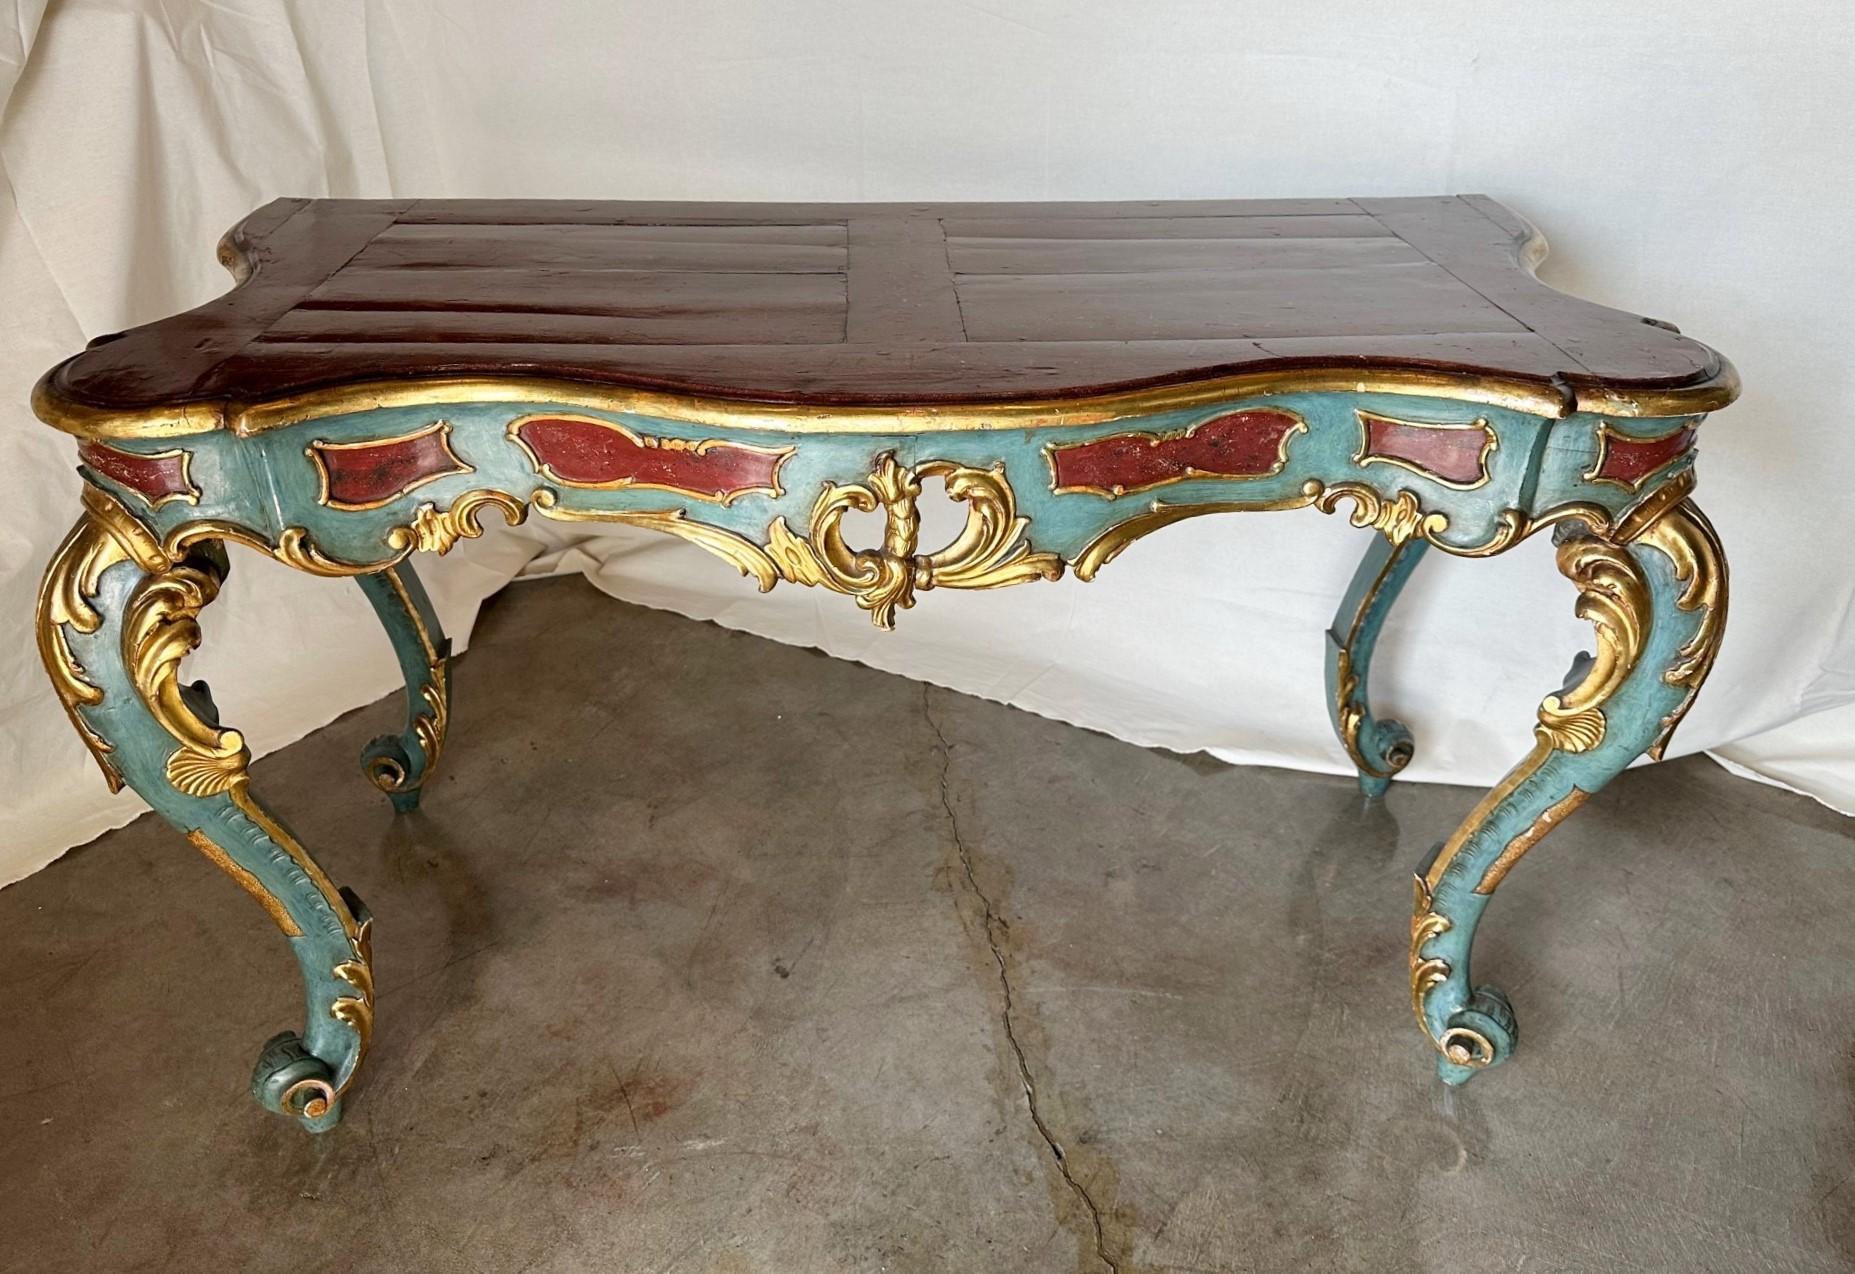 Venetian Rococo Gilt Painted Faux Stone Console Entry Table Office Desk Antique For Sale 3